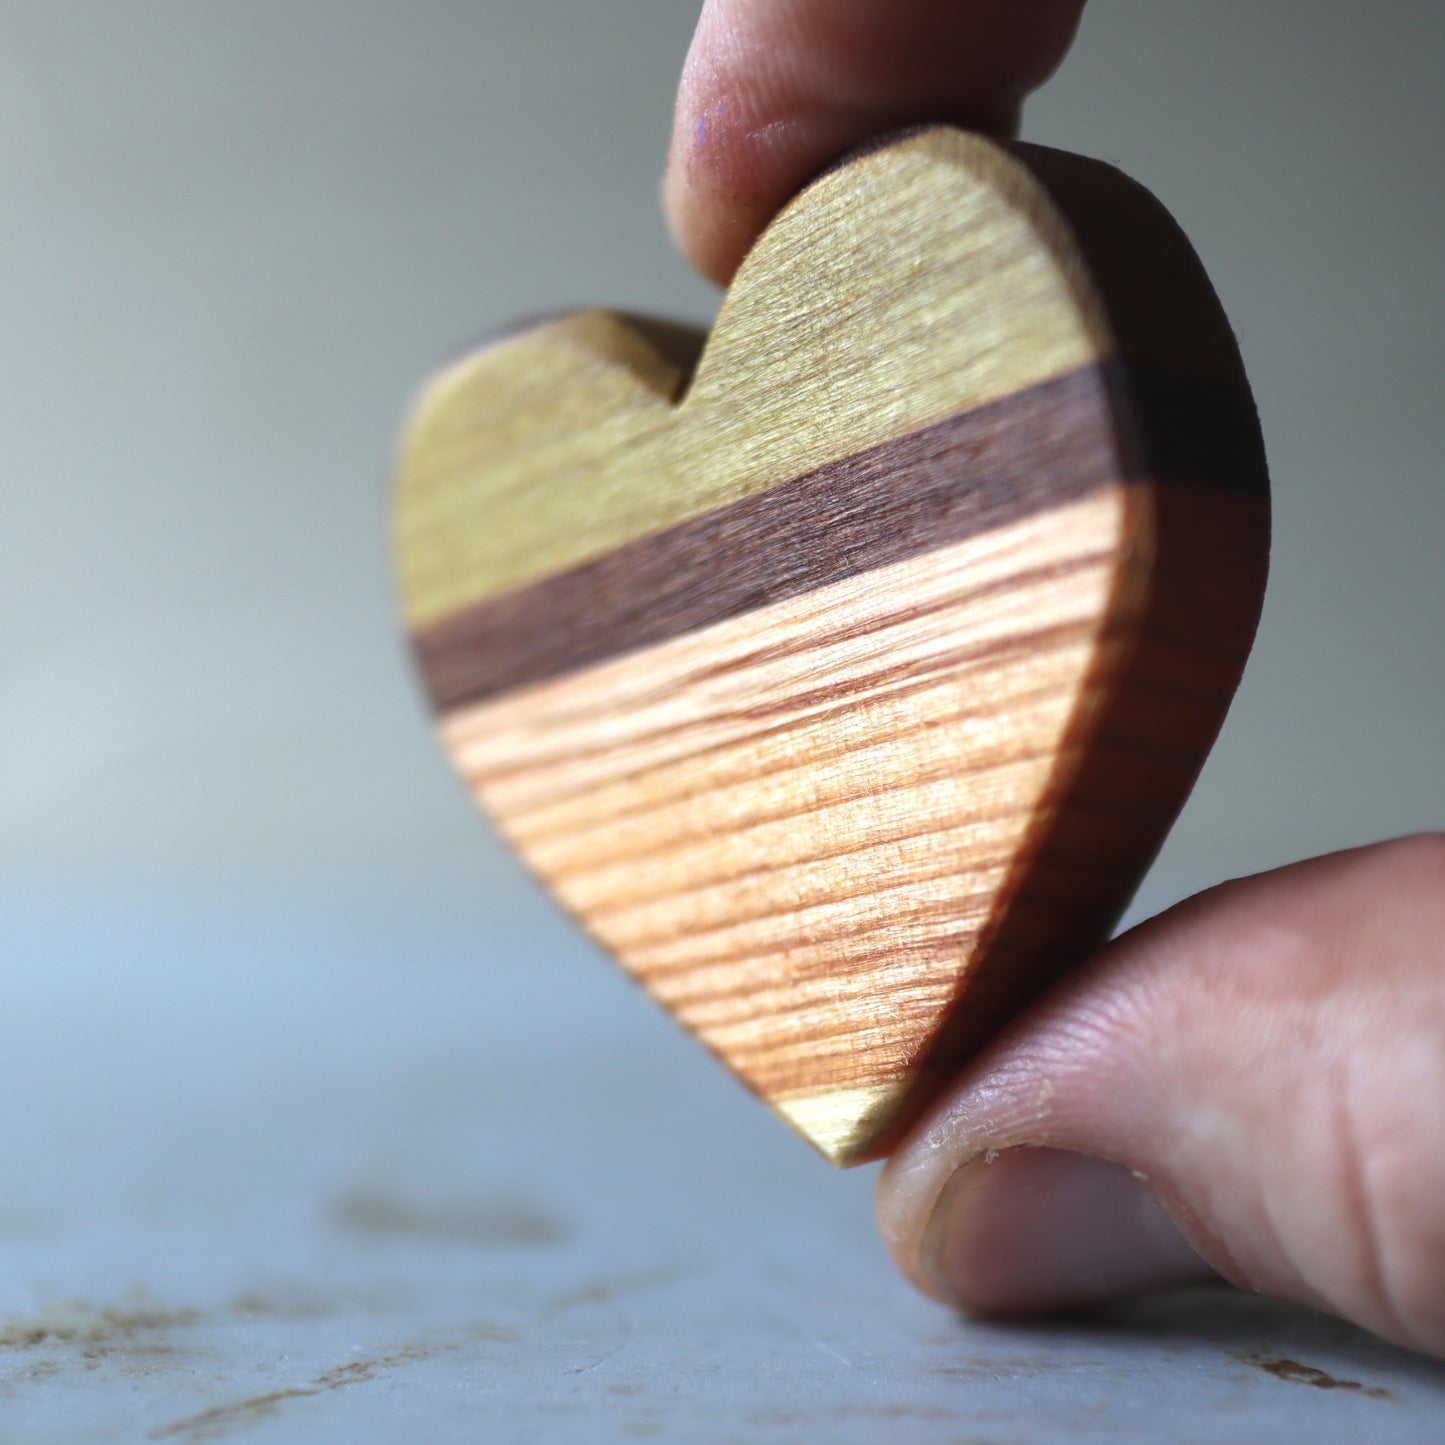 Imperfect Wooden Hearts – Dennehey Design Co.